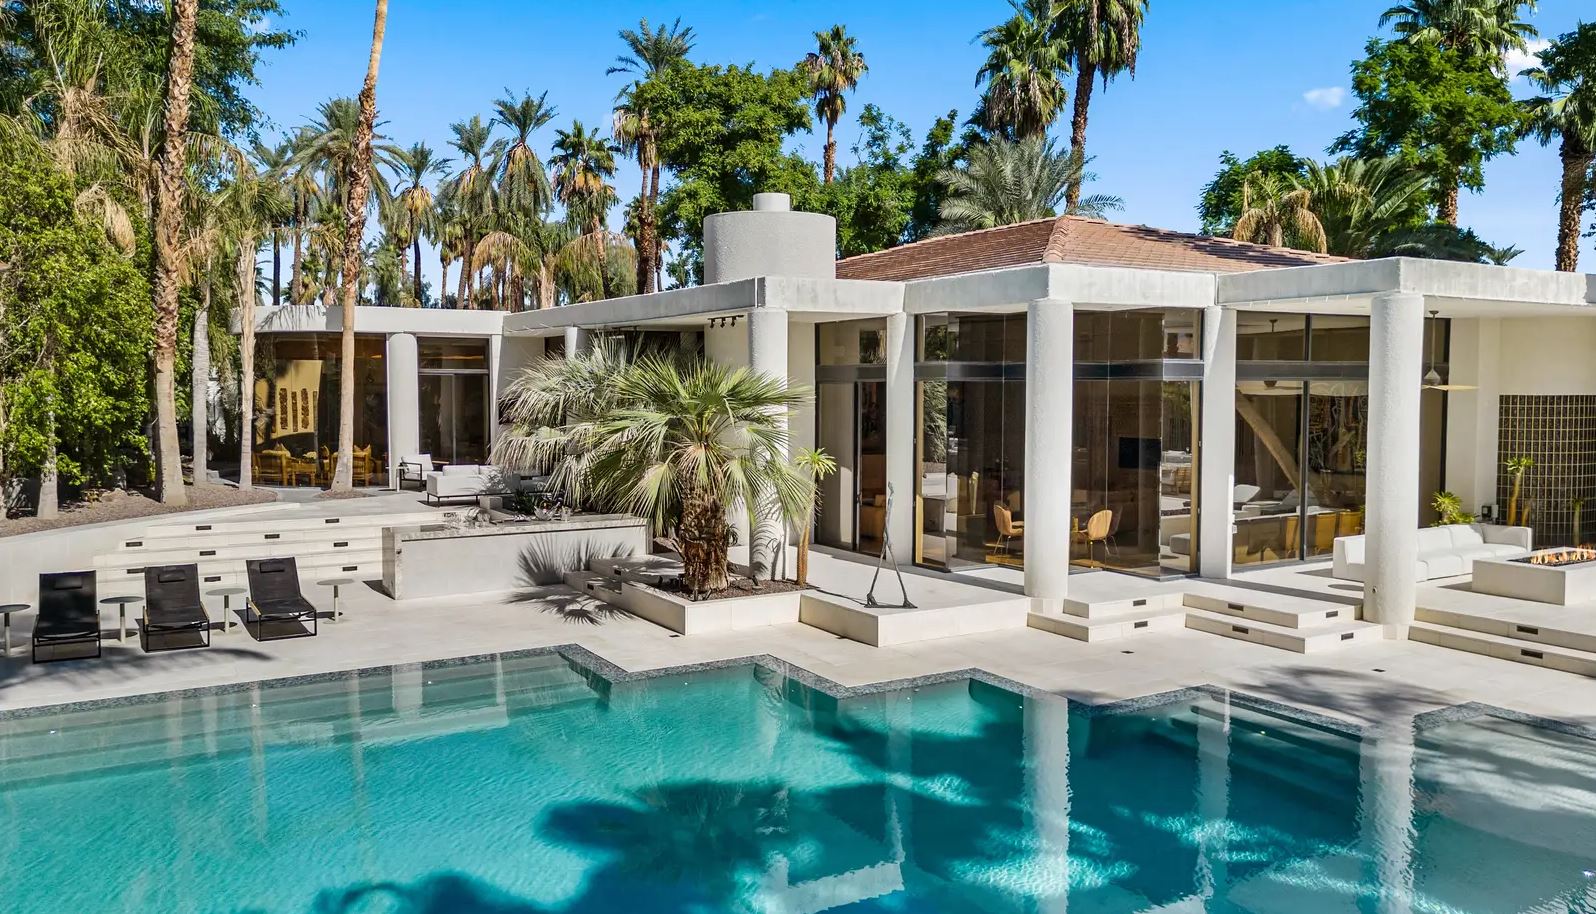 Check Out This Palatial Contemporary Estate in Rancho Mirage